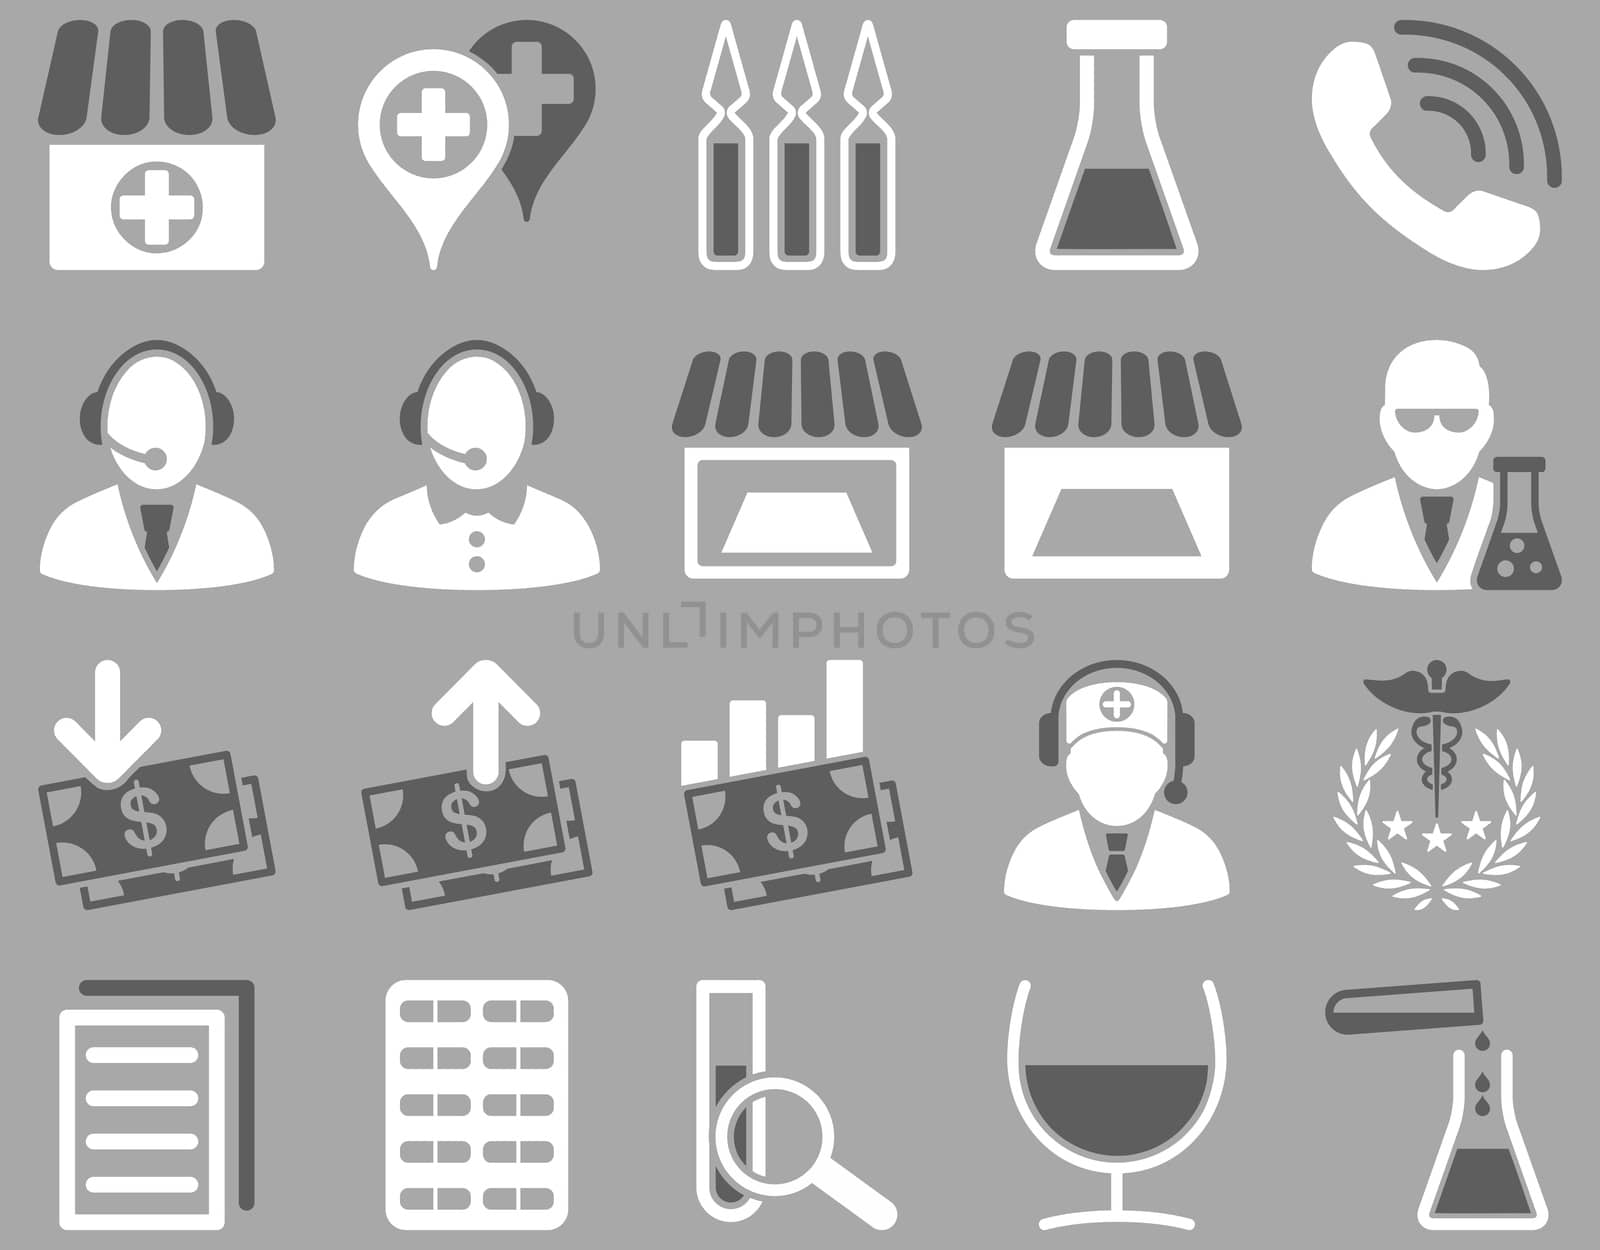 Medical icon set. Style: bicolor icons drawn with dark gray and white colors on a gray background.